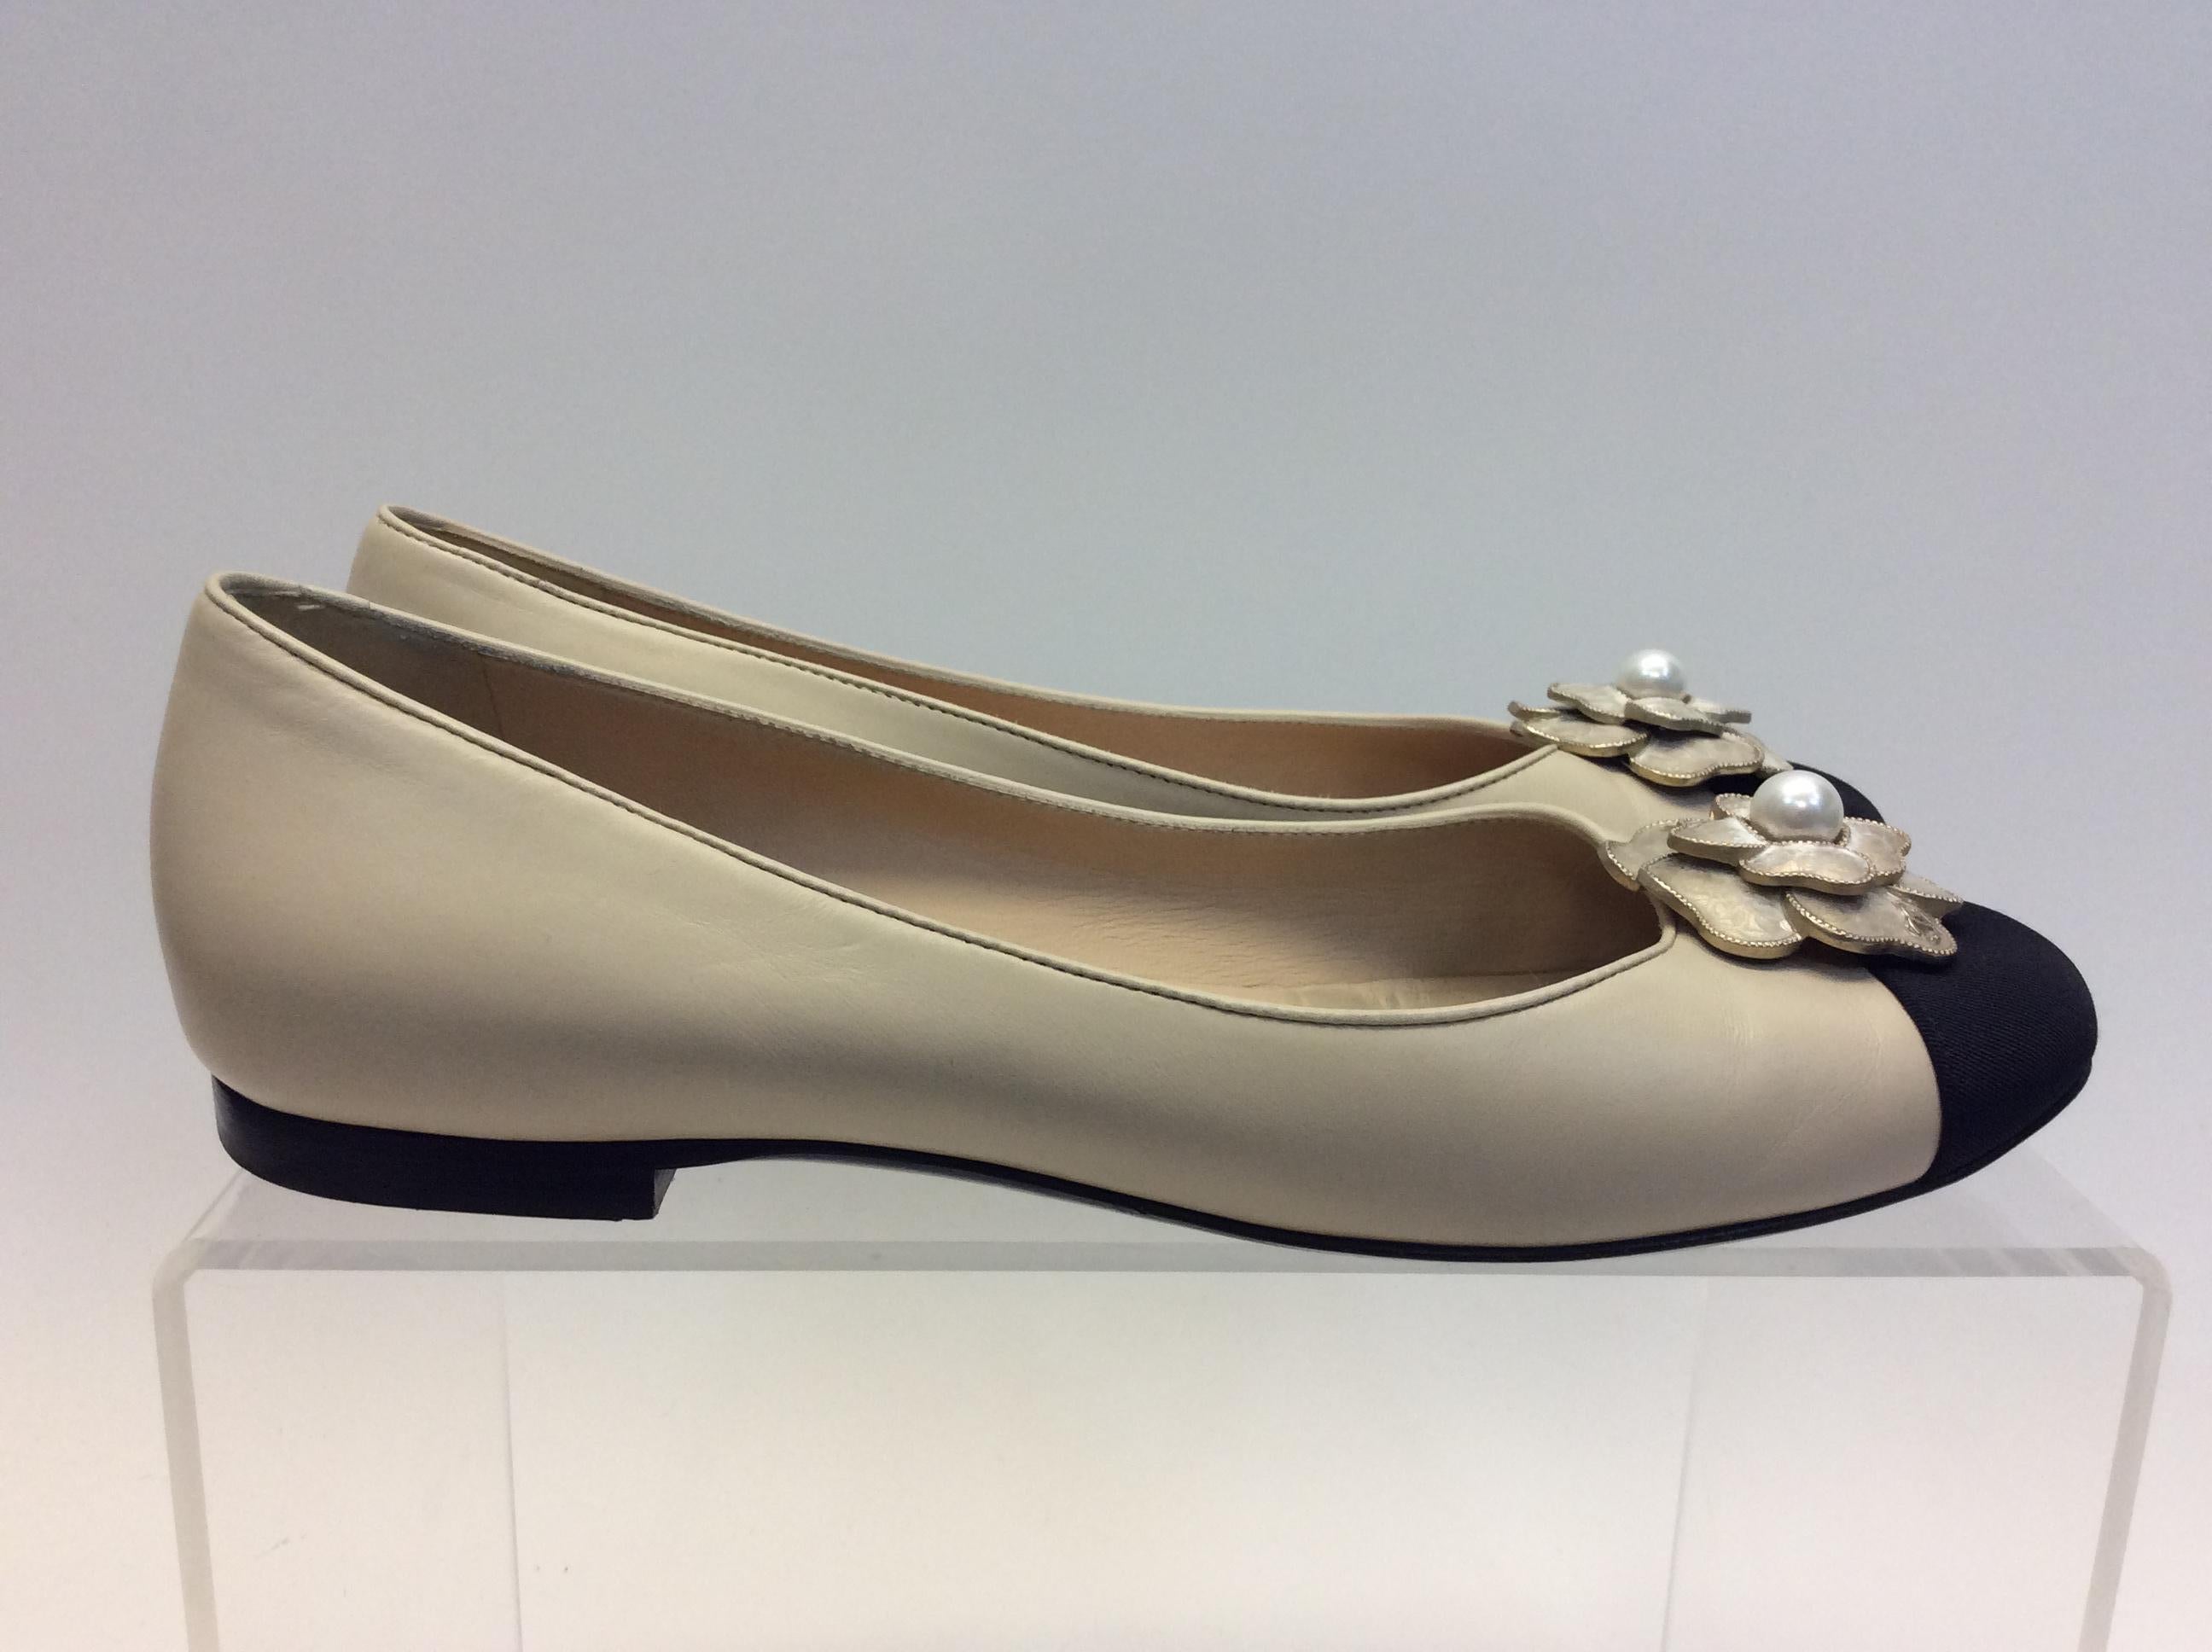 Chanel Tan and Black Flower Ballet Flats In Good Condition For Sale In Narberth, PA